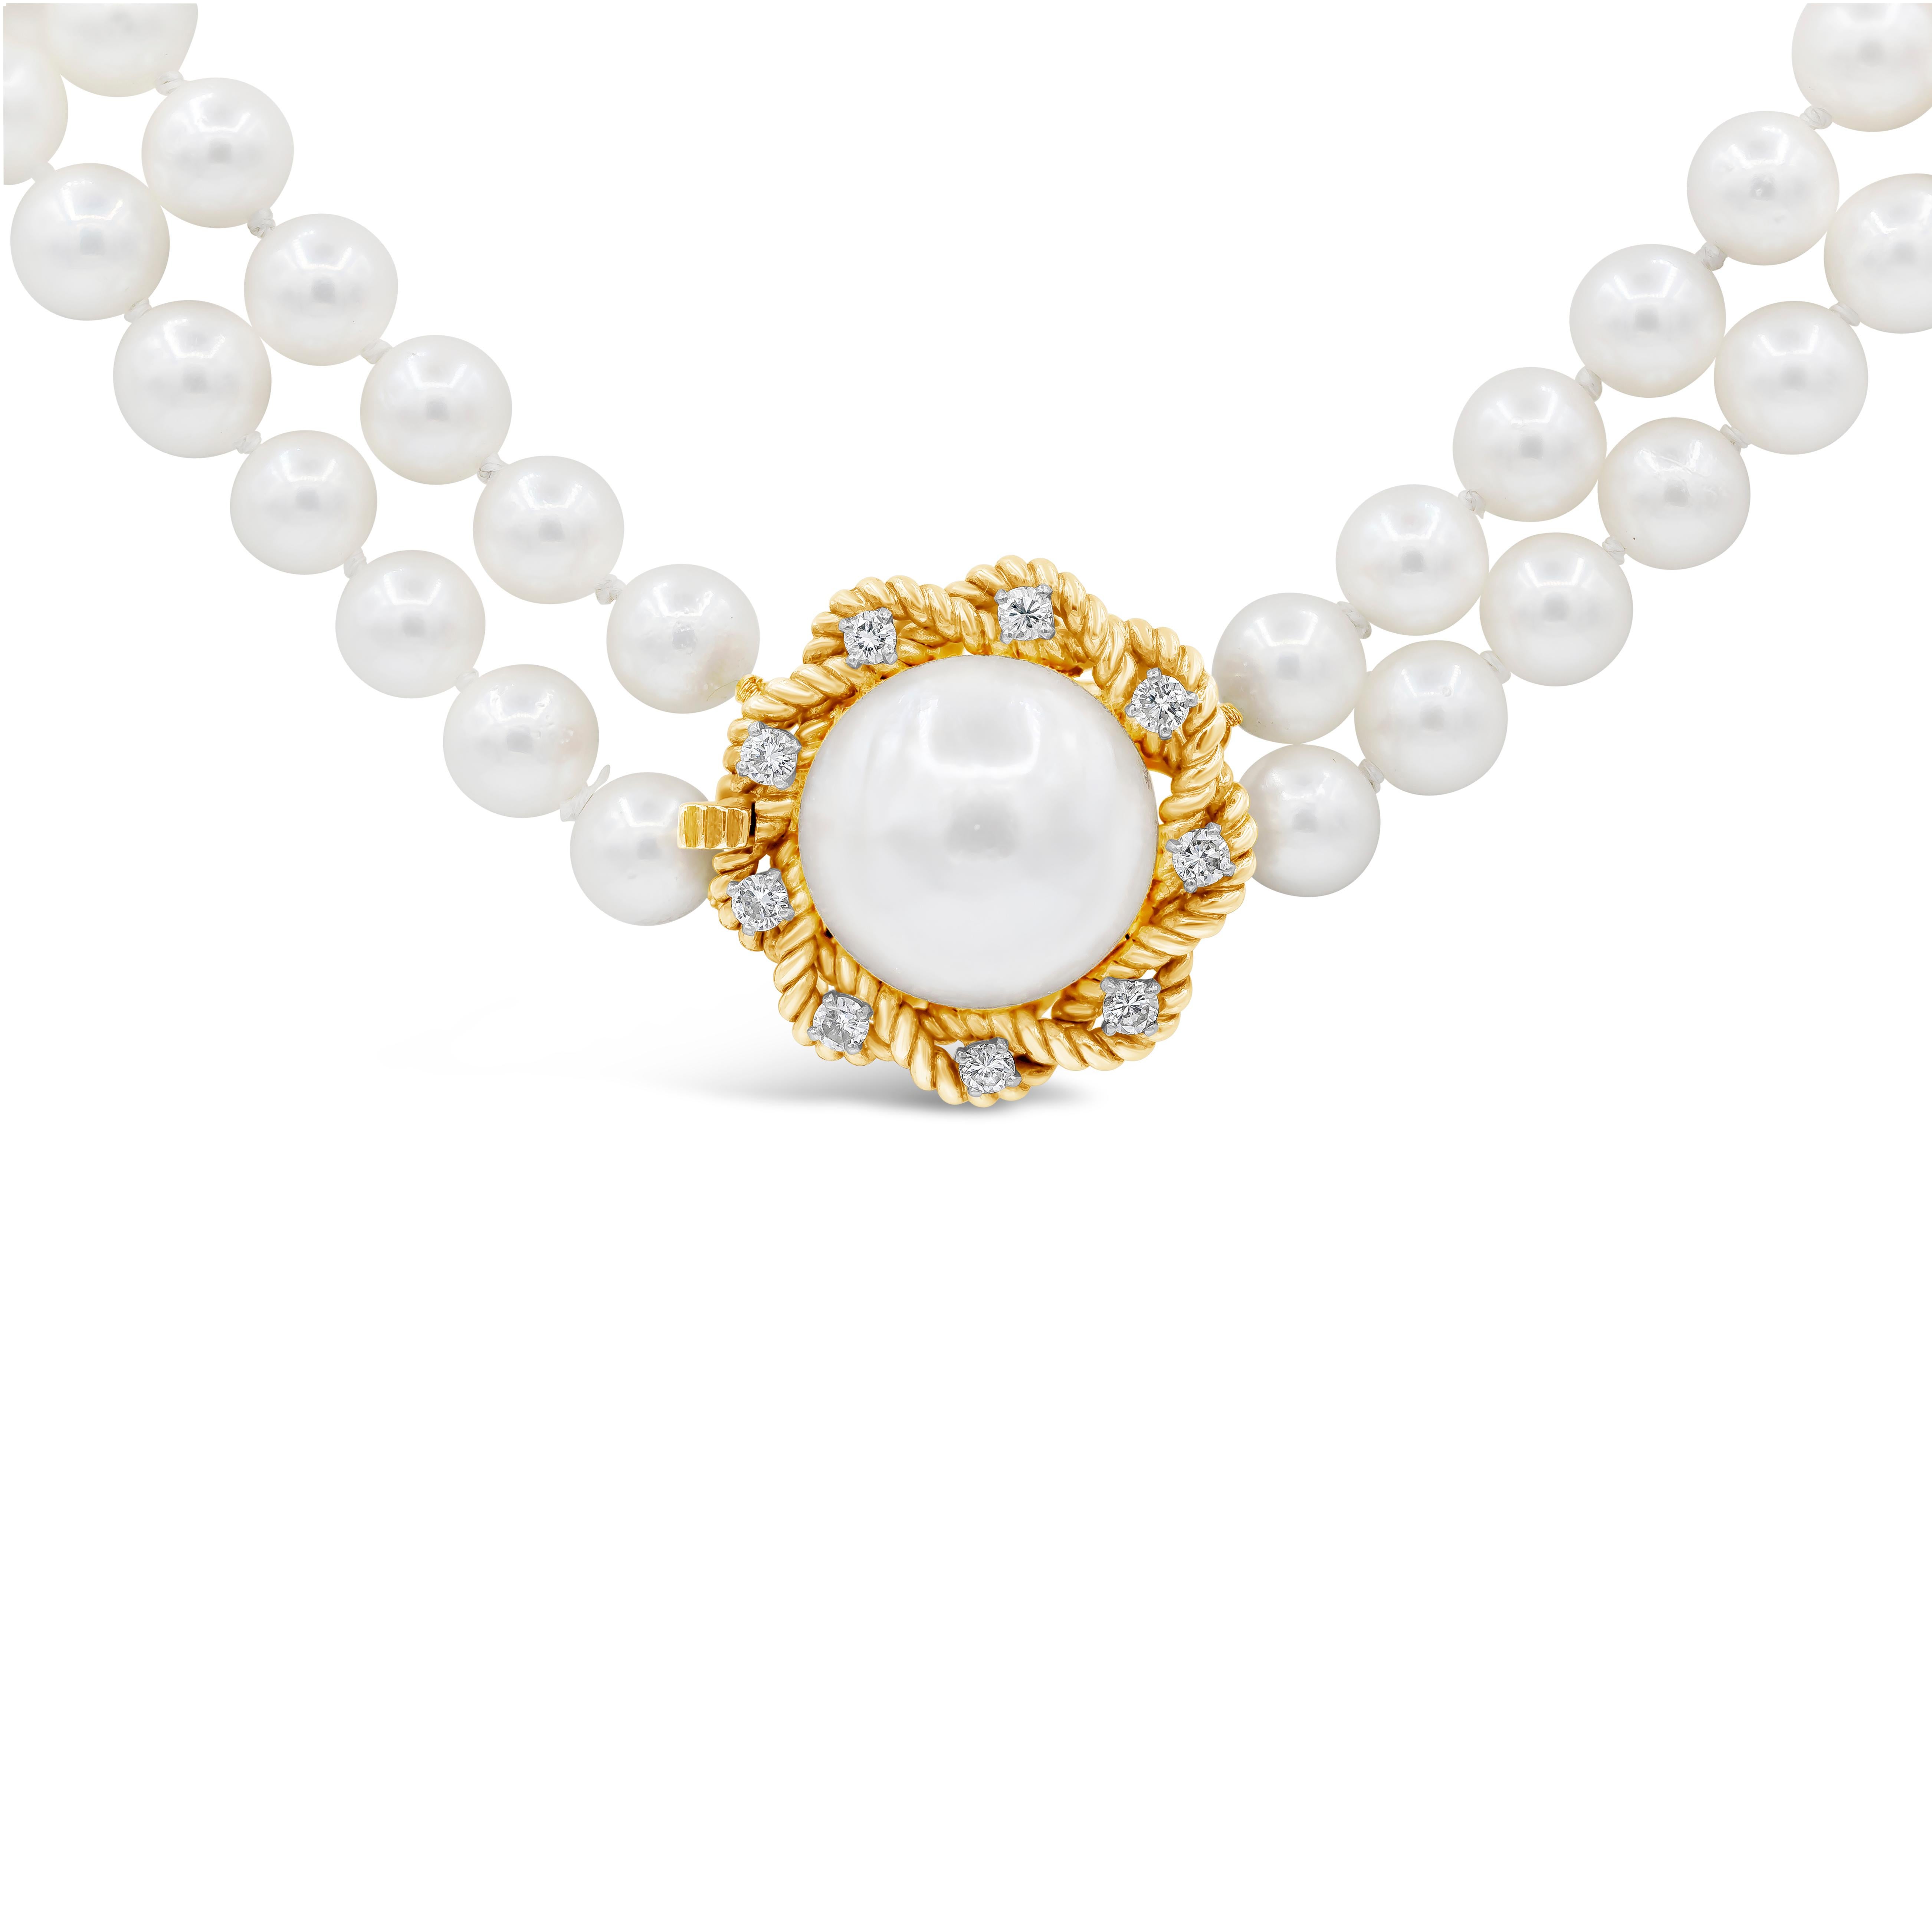 A chic pearl and diamond necklace showcasing one large pearl set in a weaving rope setting accented with 0.40 carat total brilliant round diamonds. Attached to two beautiful strands of pearls and Made in 18K yellow gold.